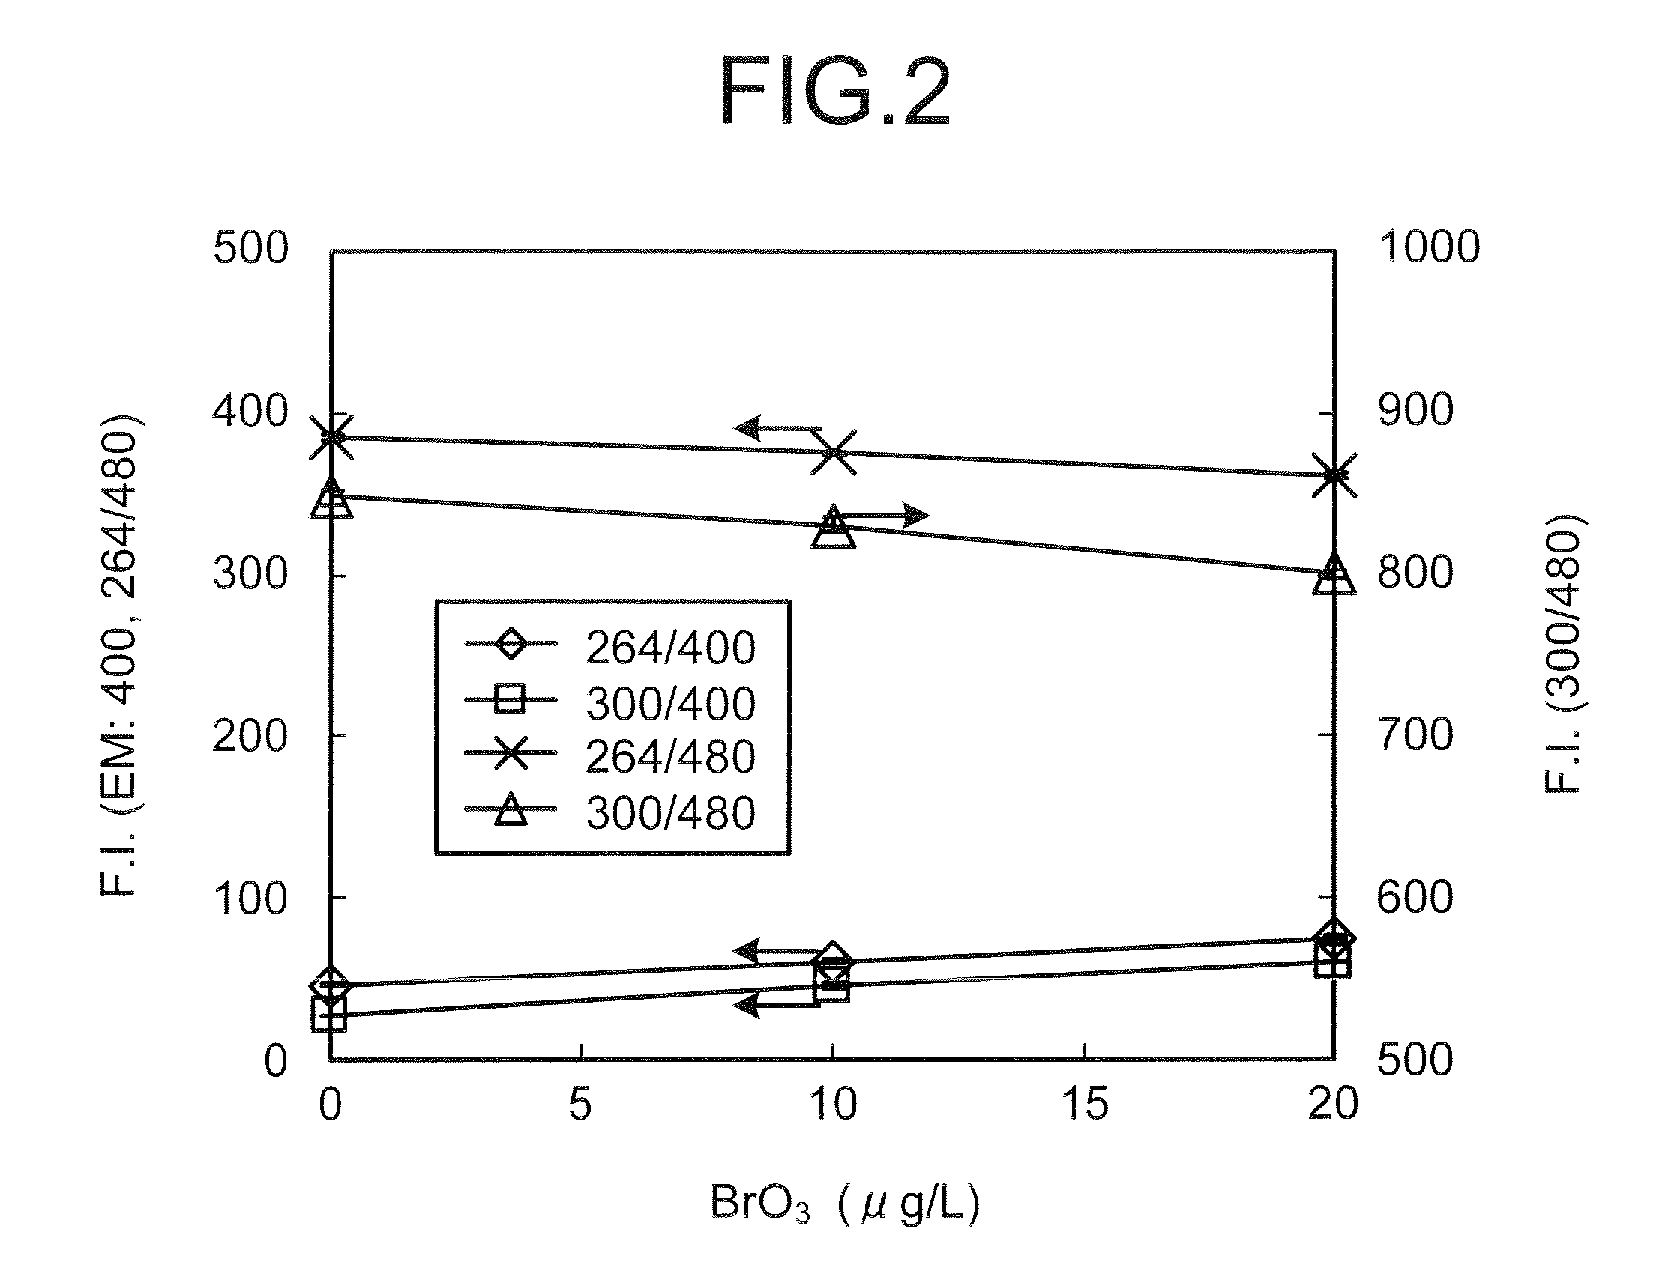 Method and apparatus for measuring bromate ions